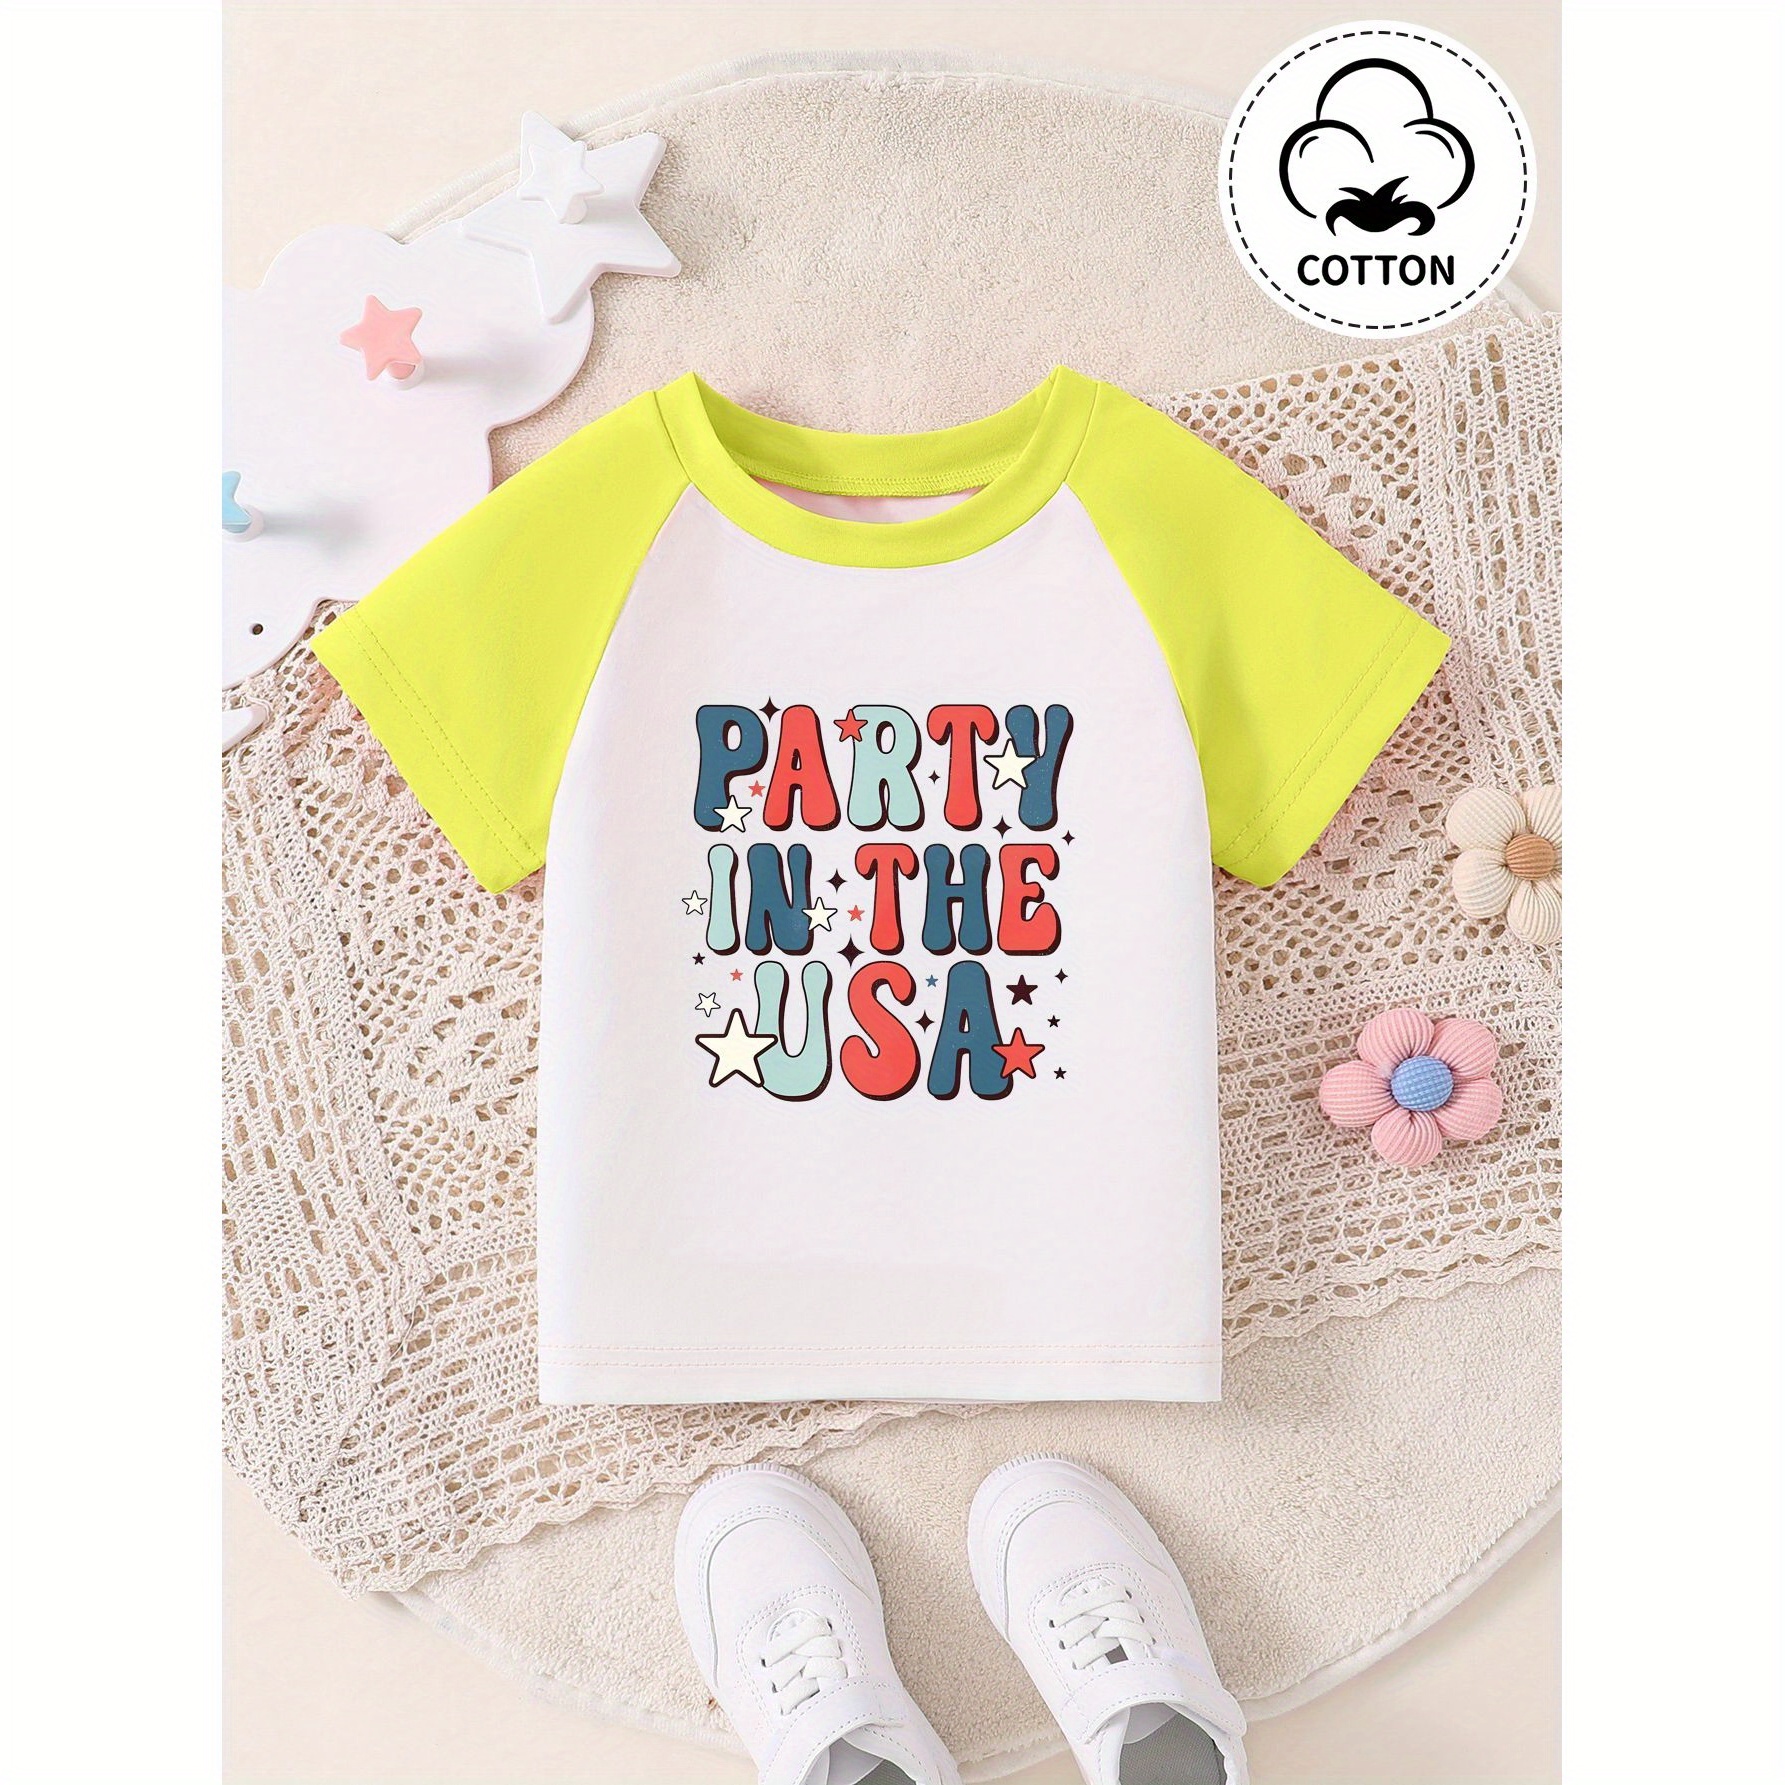 

Party In The Usa & Stars Graphic Print, Baby Girls' Stylish Slightly Flex Crew Neck Short Sleeve Cotton Raglan Tee For Spring & Summer, Toddler Girls' Clothes For Everyday Activities, As Gifts